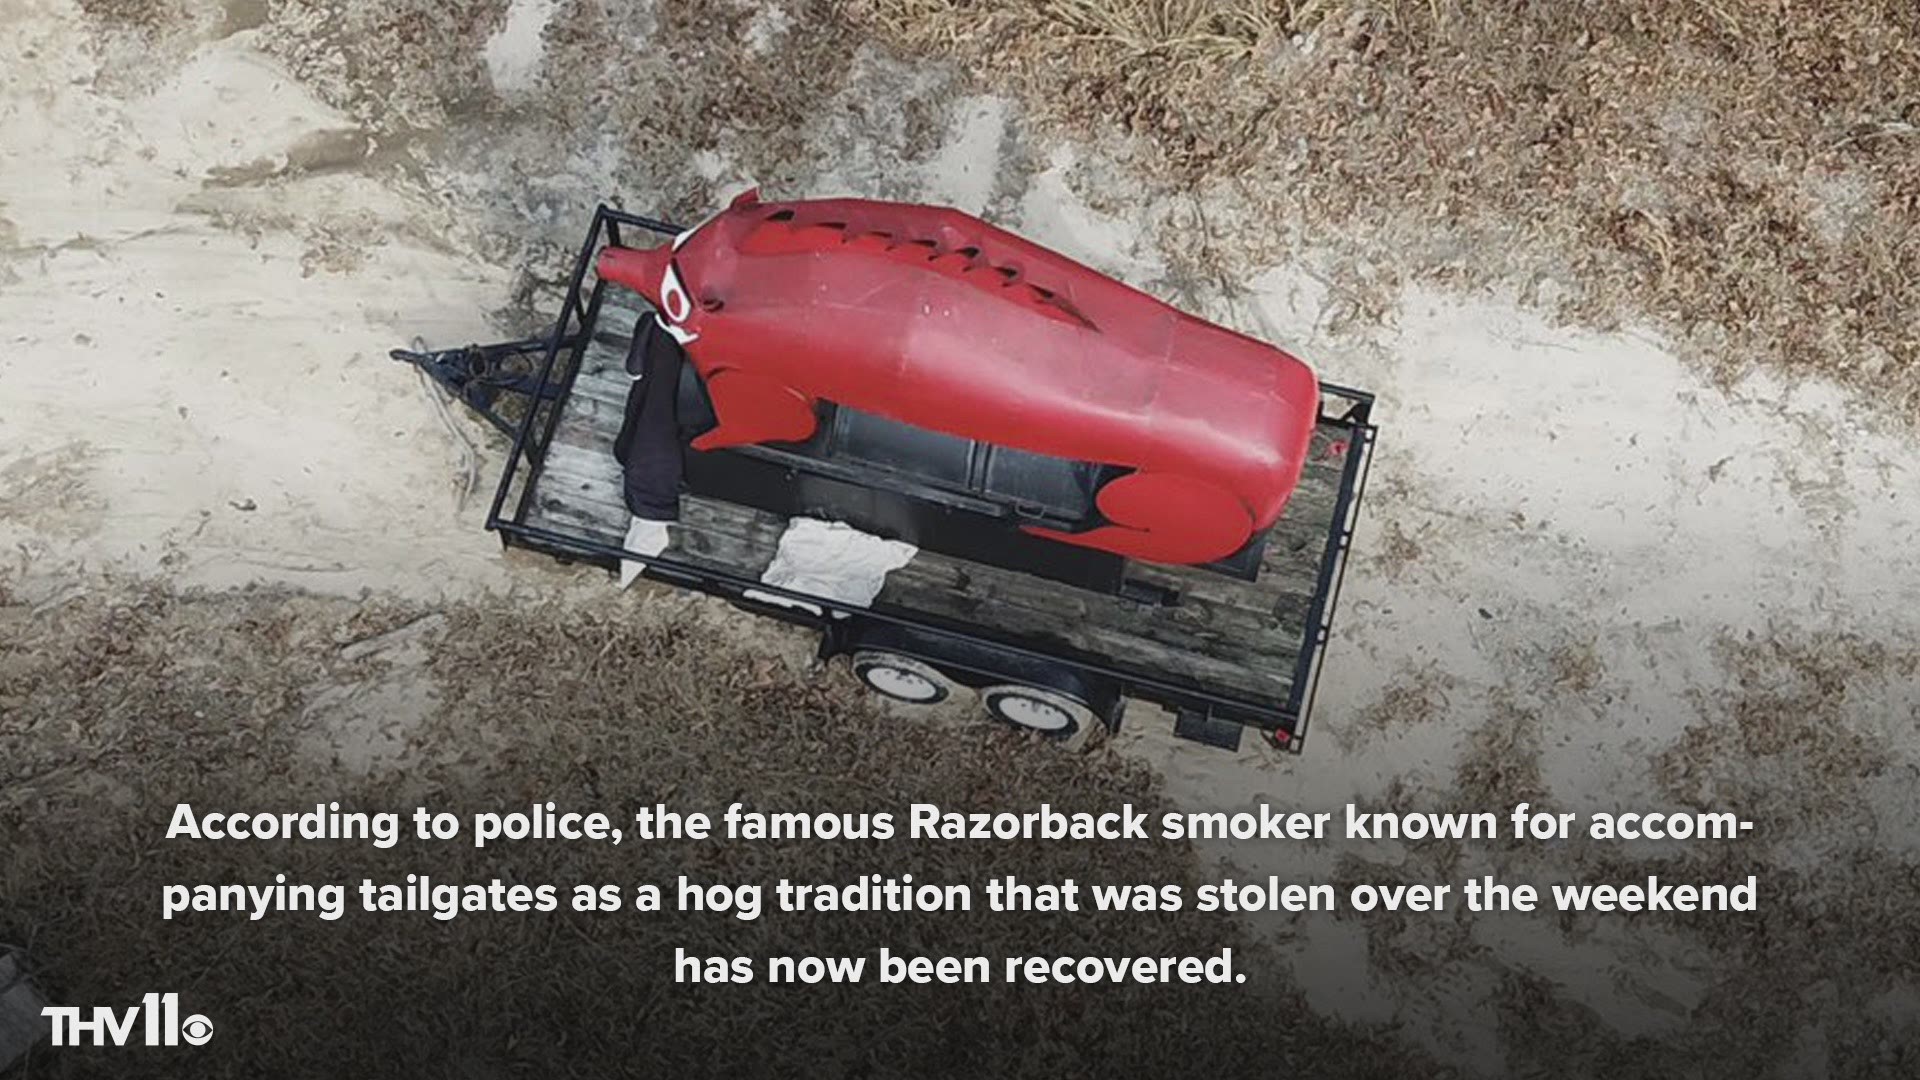 According to police, the famous Razorback smoker that accompanies tailgates traditionally that was stolen over the weekend has now been recovered.